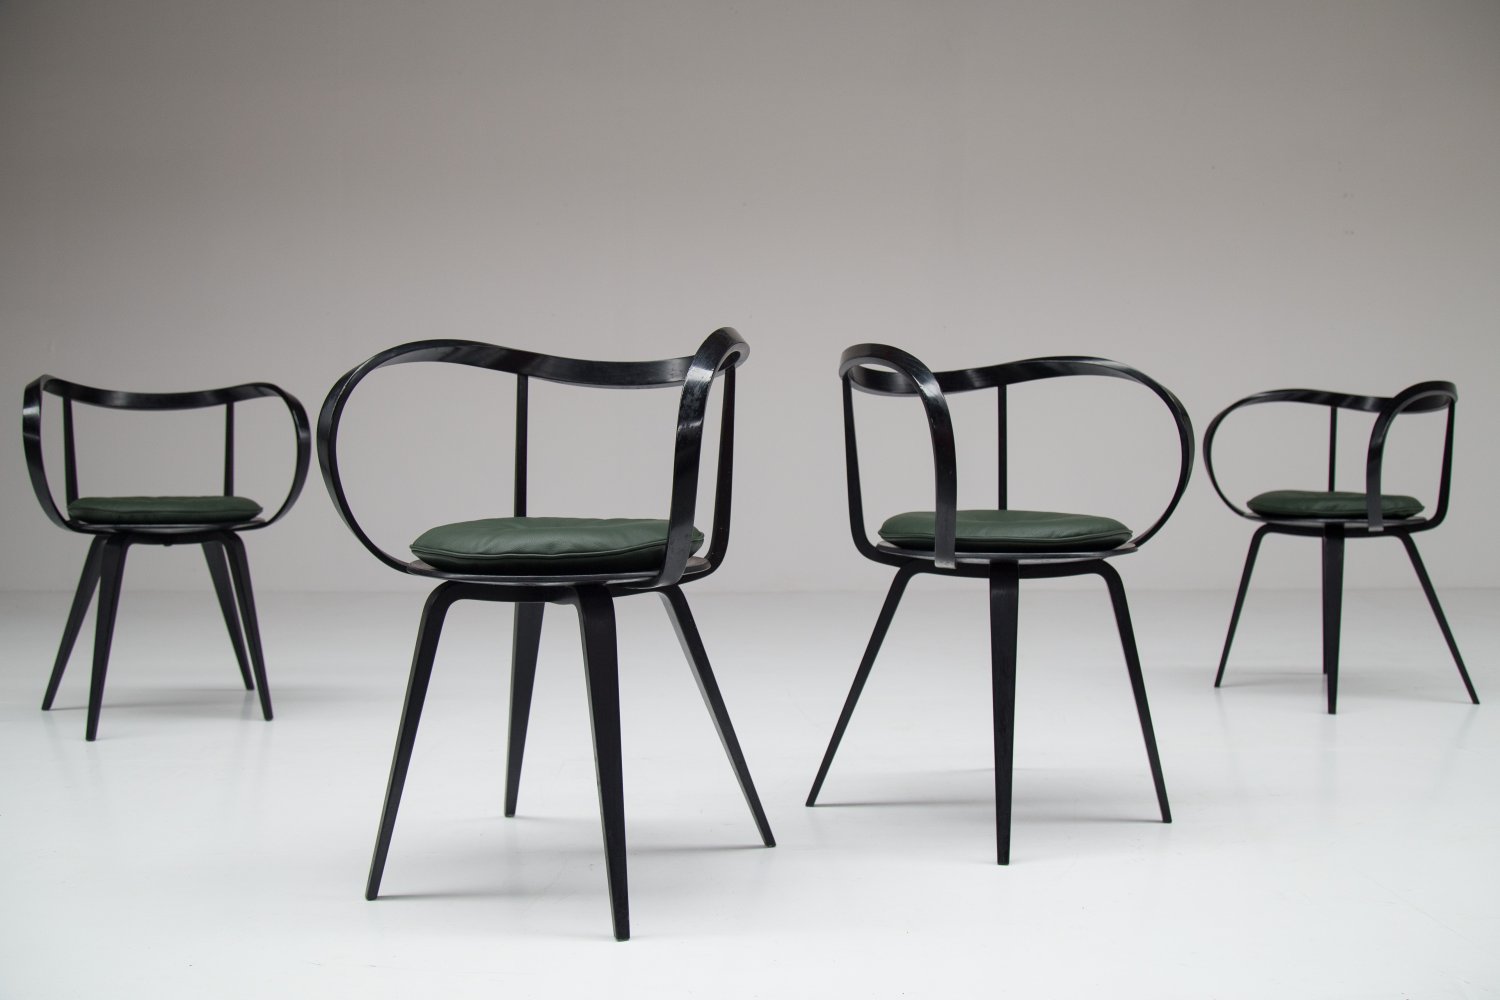 Set of 4 Pretzel chairs by George Nelson.